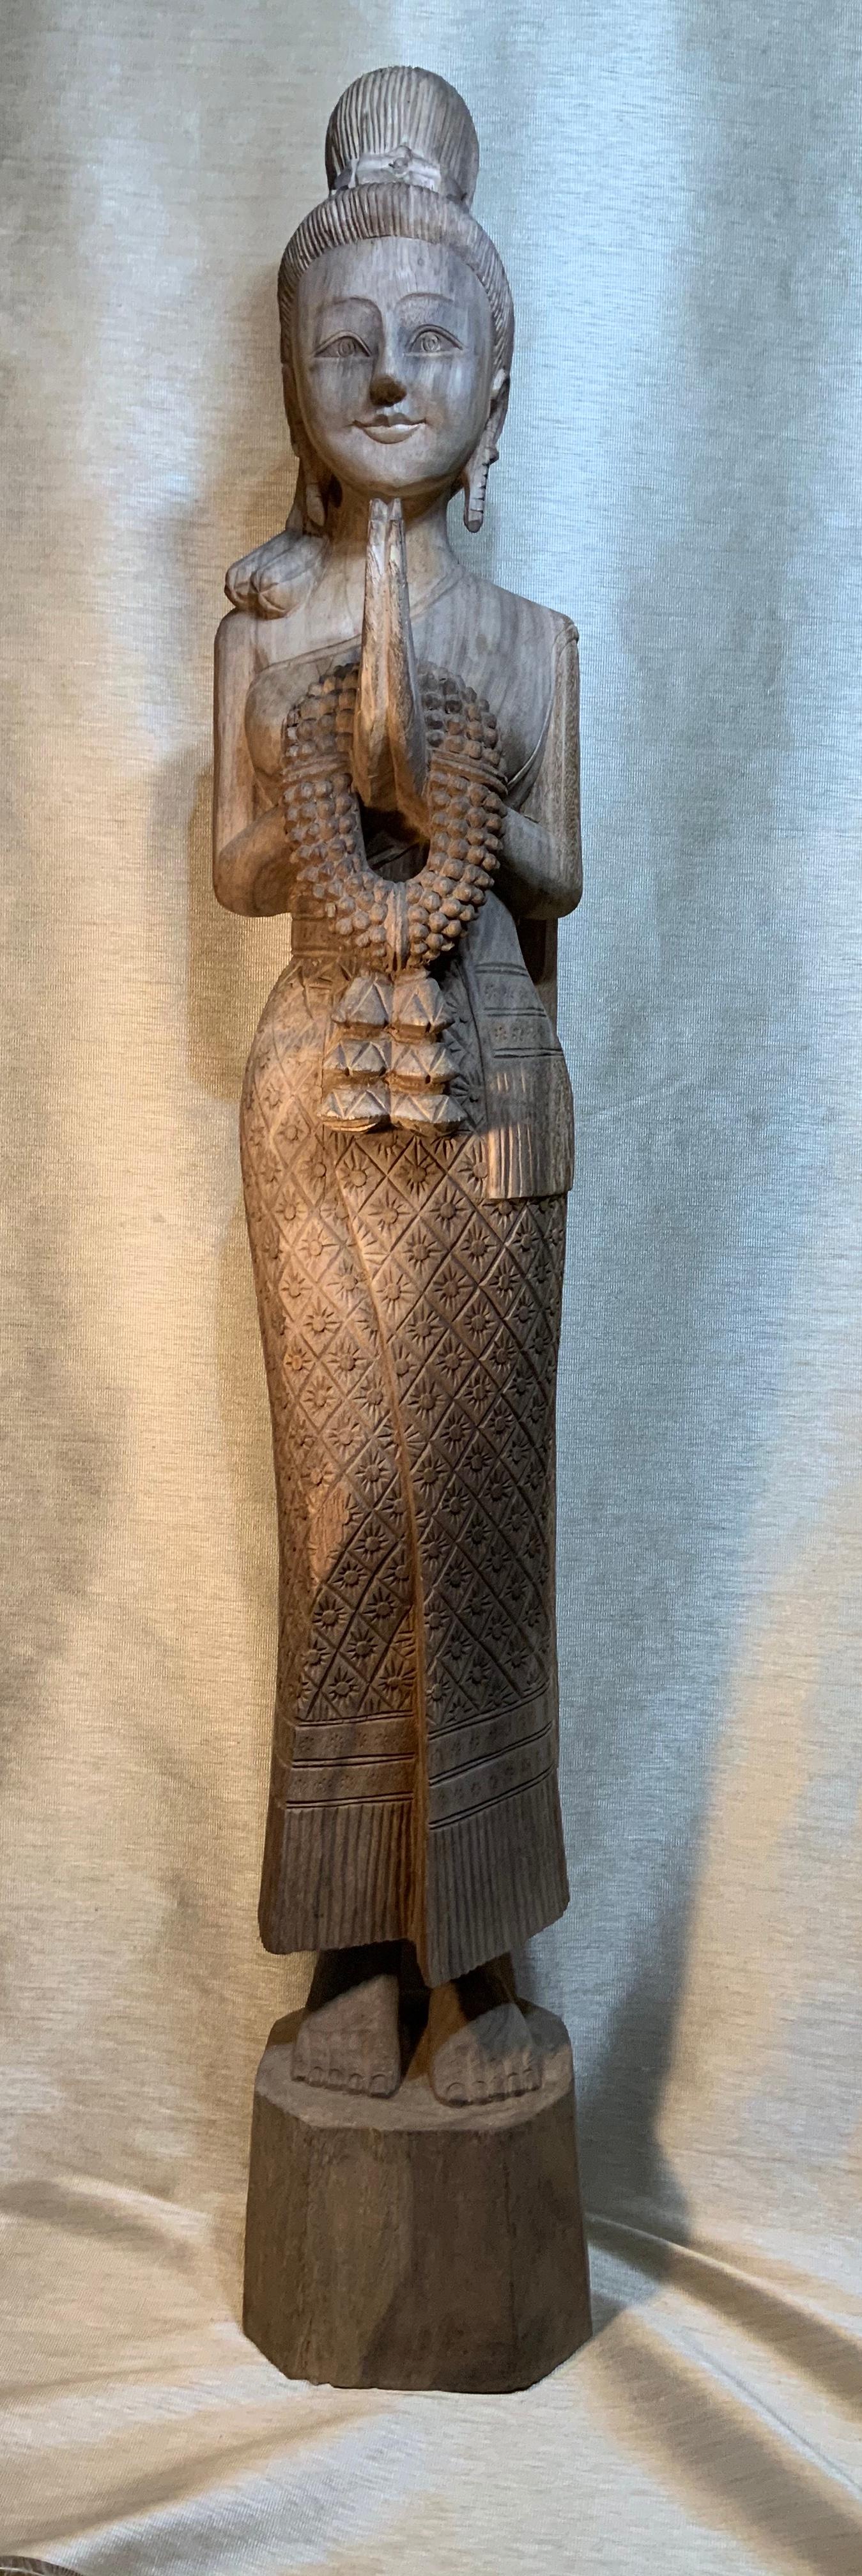 Elagent Quan Yen statue made of hand carved wood, beautiful facial expiration, hands forward holding bouquet of flowers in grace and goodwill. Exceptional looking dress with unusual vivid carving motifs make this beautiful statue a one of a kind